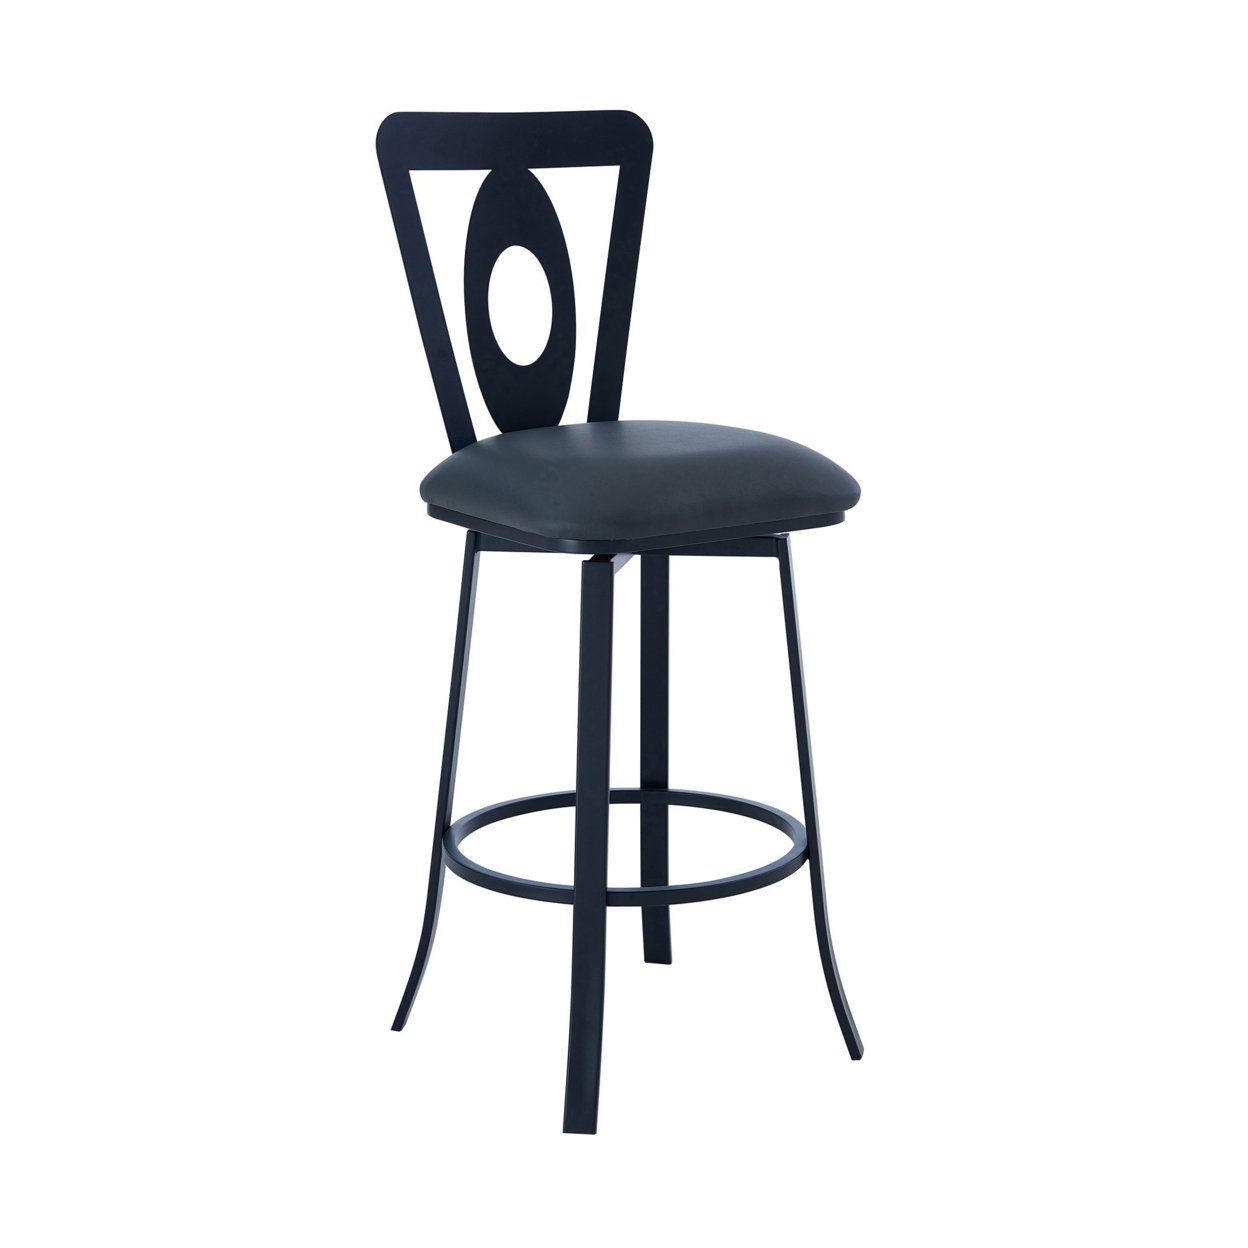 30 Inches Leatherette Barstool With Oval Cut Out, Black- Saltoro Sherpi